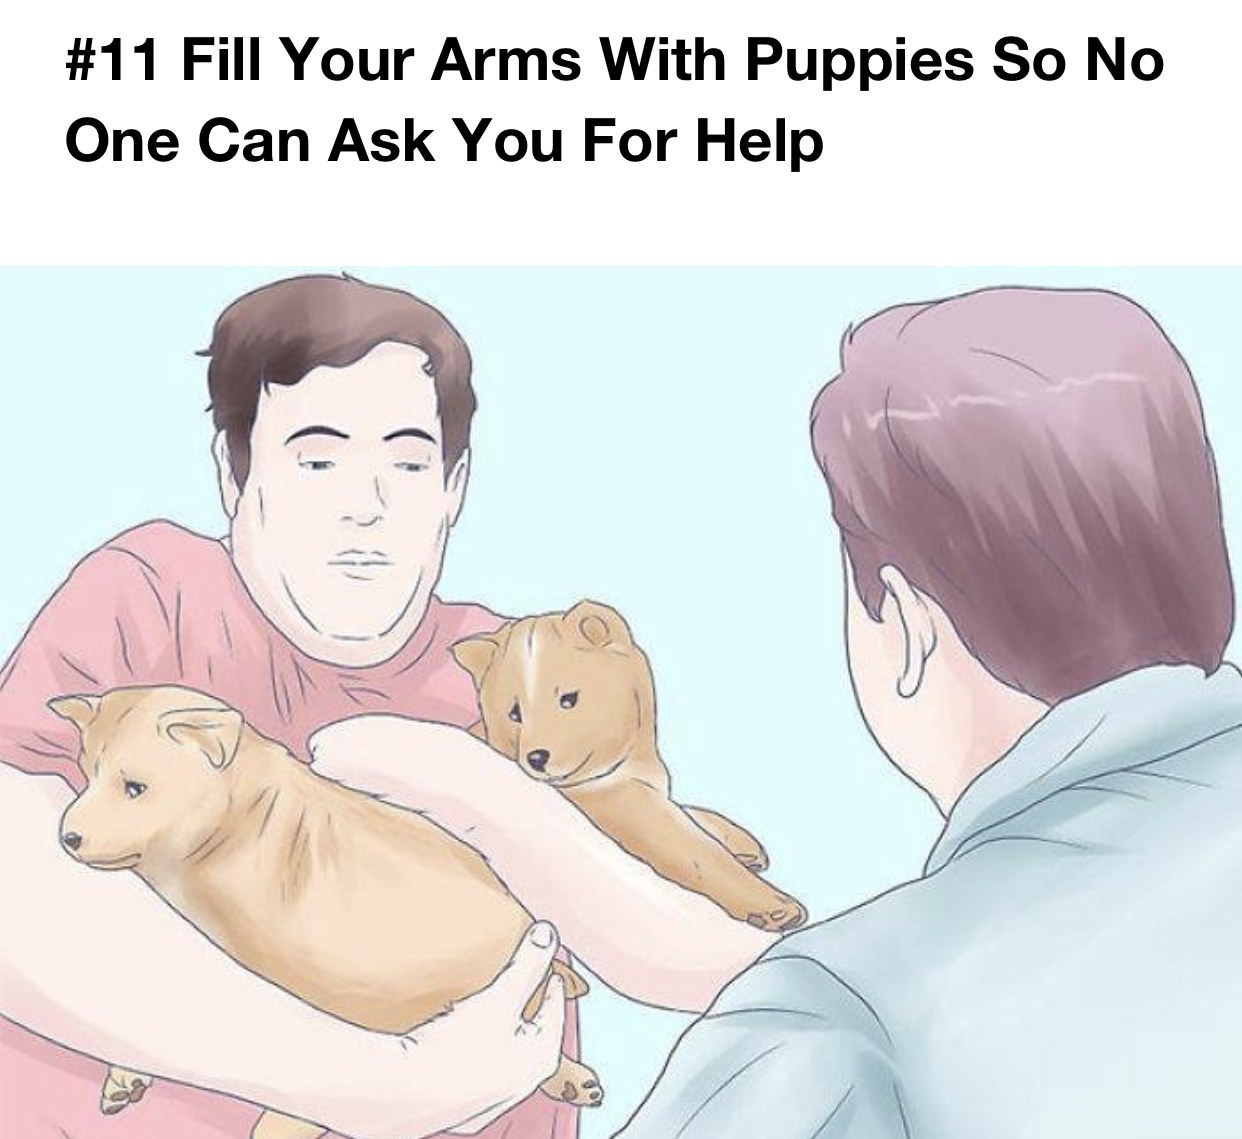 fill your arms with puppies so no one can ask you for help - Fill Your Arms With Puppies So No One Can Ask You For Help